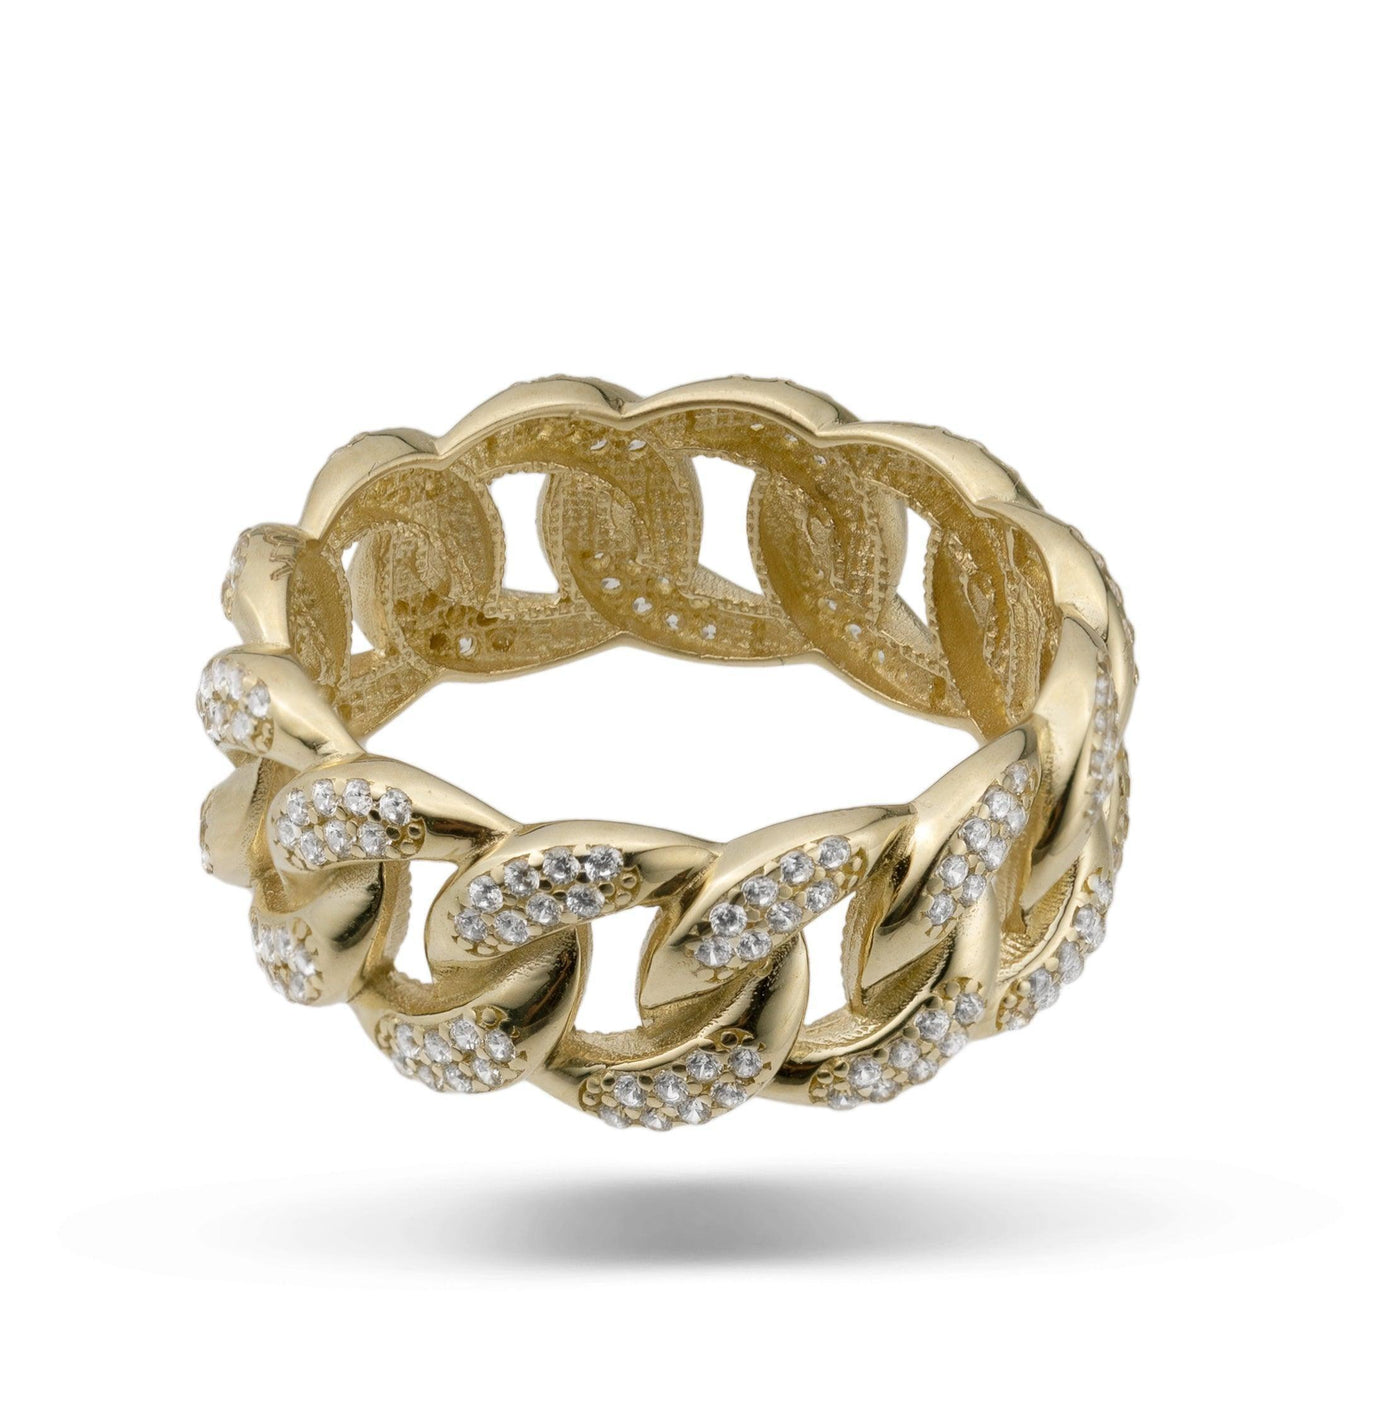 Unisex CZ Miami Cuban Curb Link Ring Solid 10K Yellow Gold Size 11 - bayamjewelry